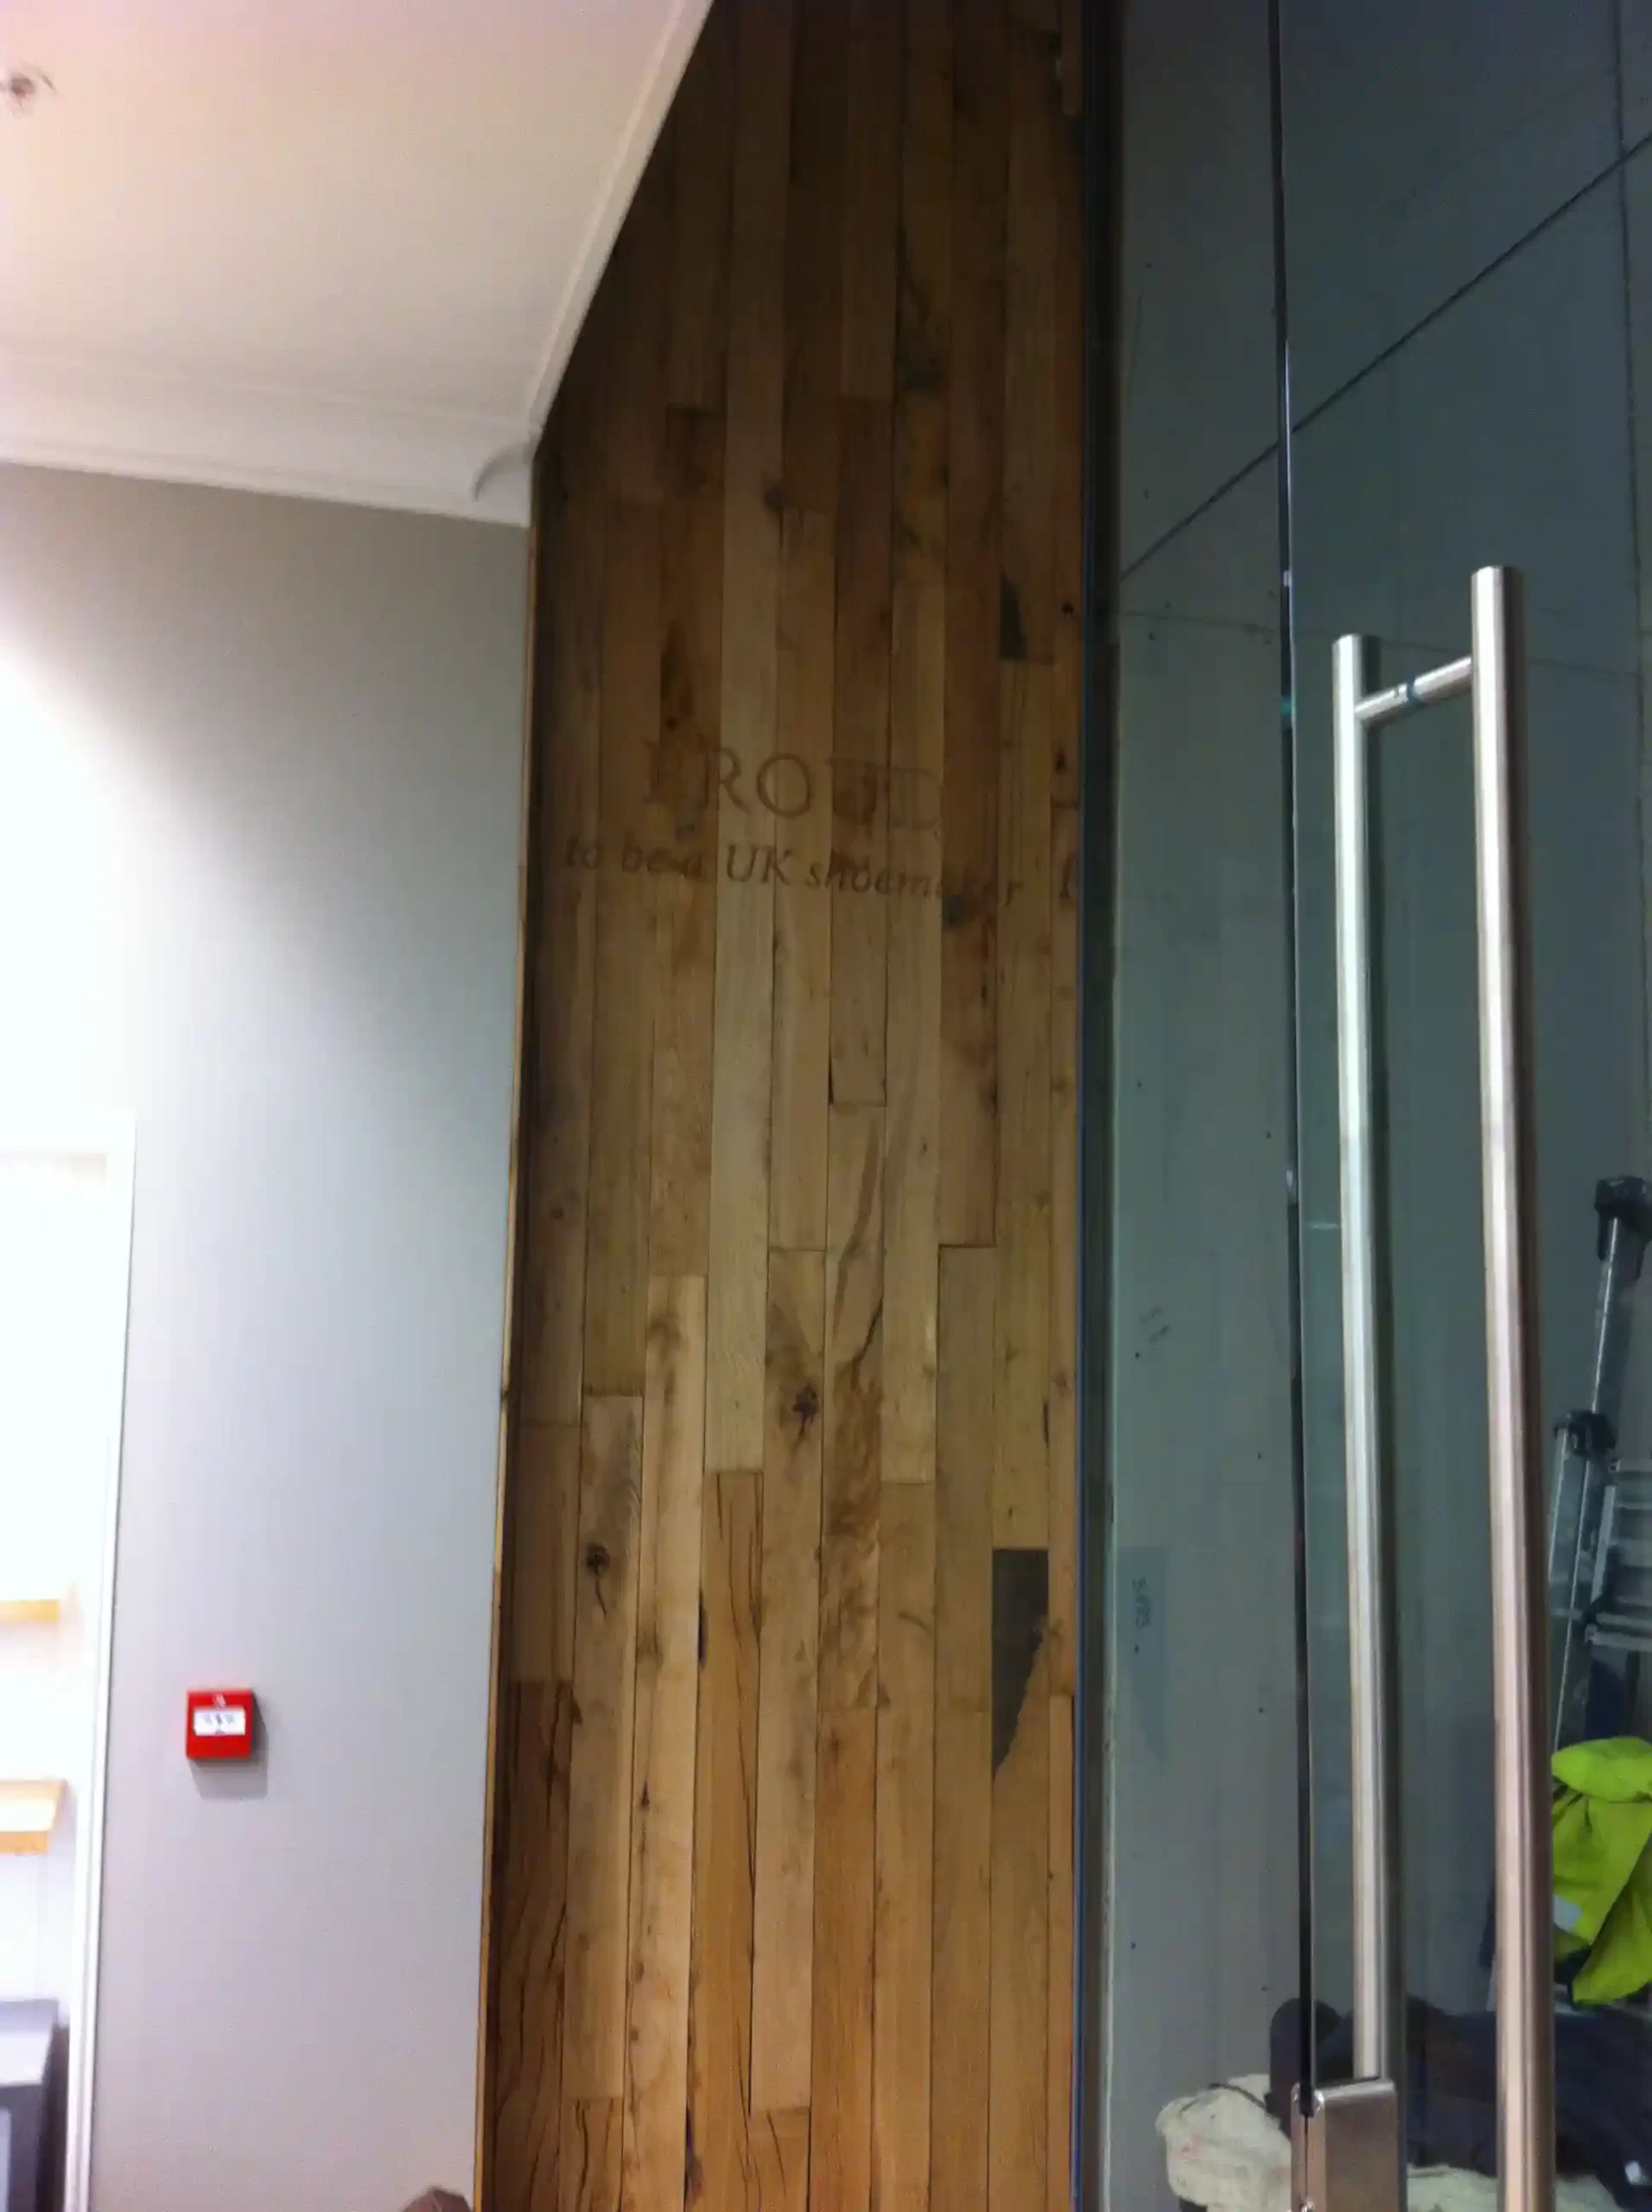 Air dried oak cladding used for shop fit